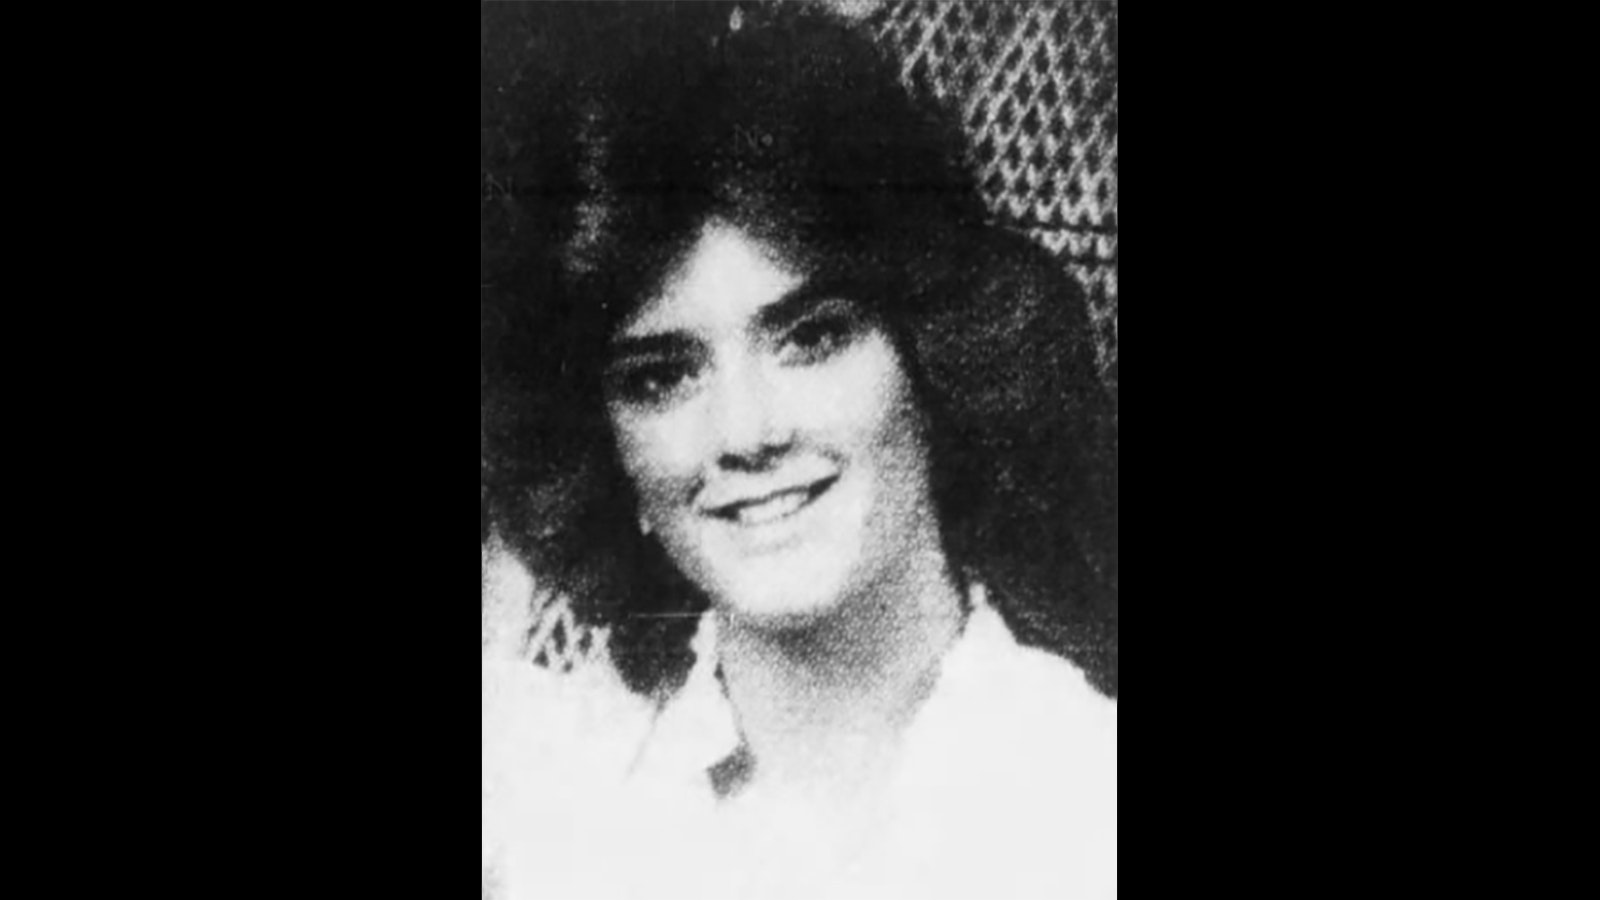 Princess Young, daughter of Cokeville Elementary School bomber David Young, in a high school photo. She had nothing to do with the bombing and her information helped investigators piece the story together.